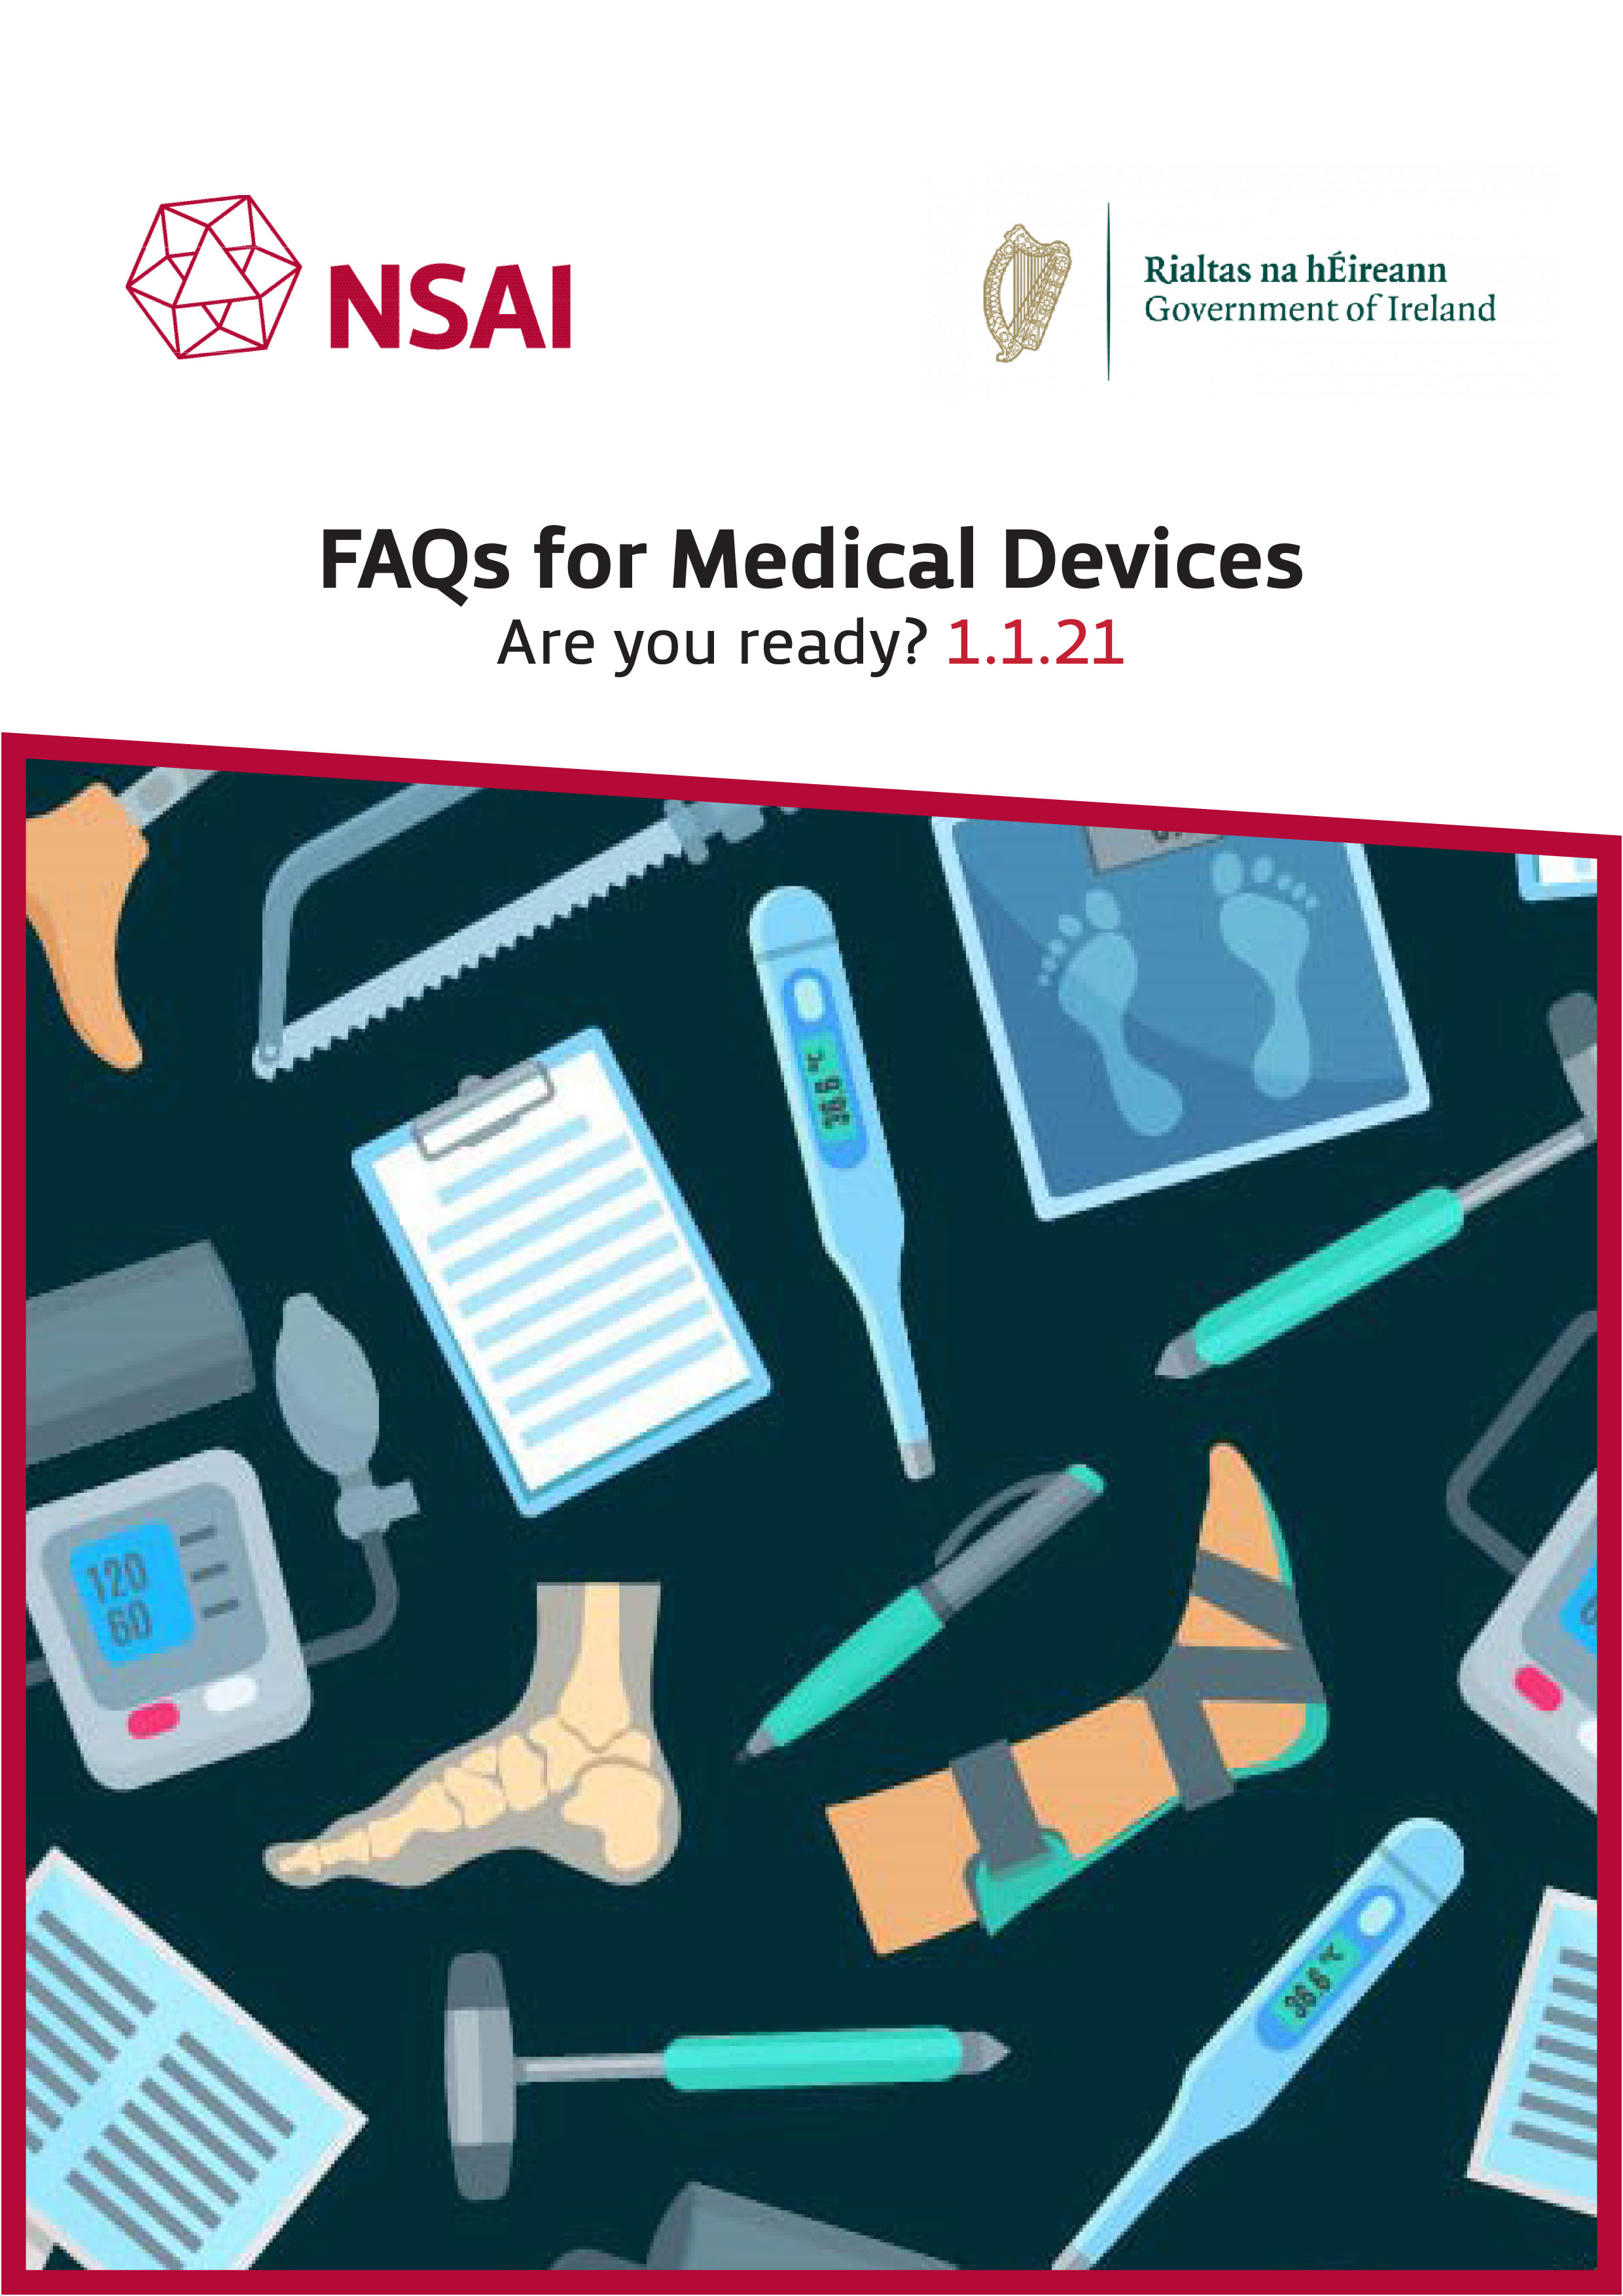 FAQs for Medical Devices Are you ready? 1.1.21